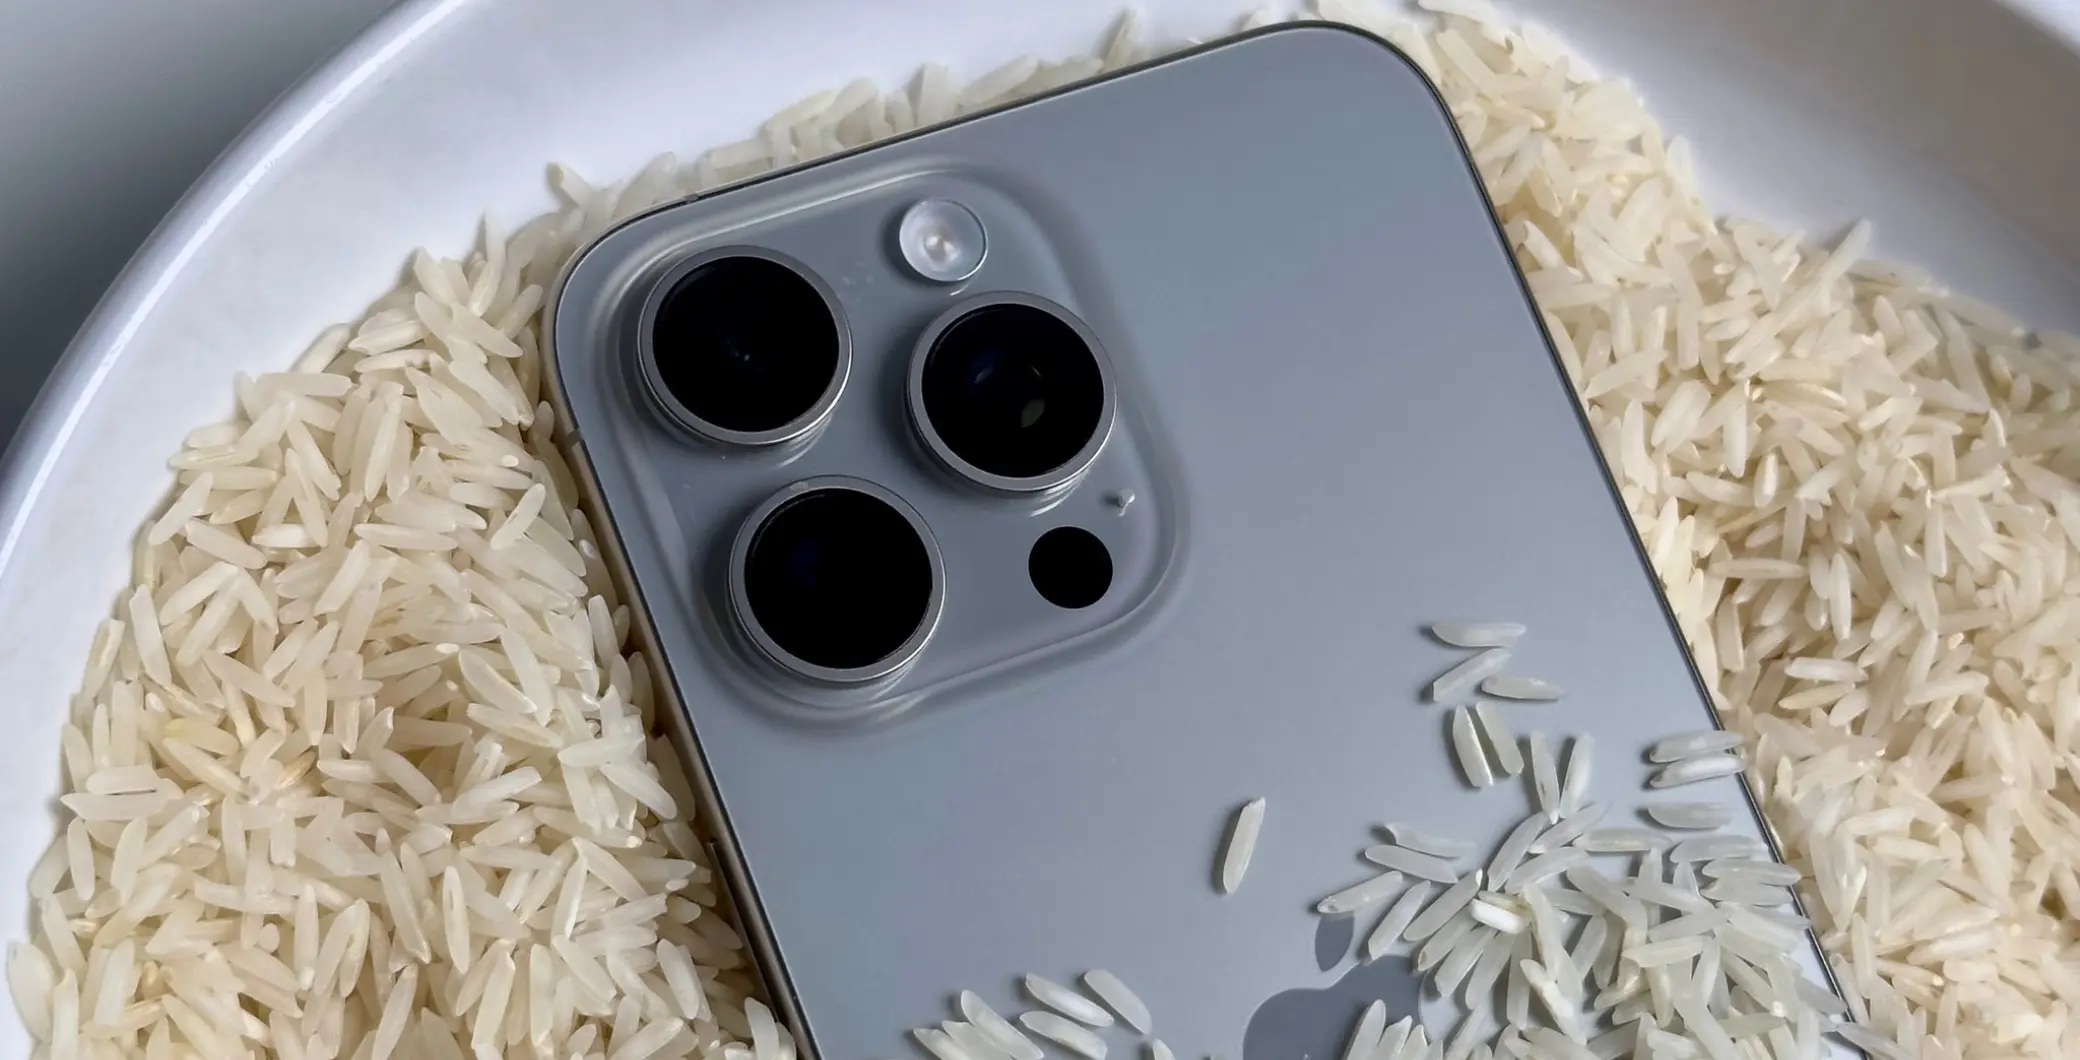 ‘Don’t set your Apple iphone in a bag of rice’: Apple’s do’s and don’ts for drying a soaked iPhone 